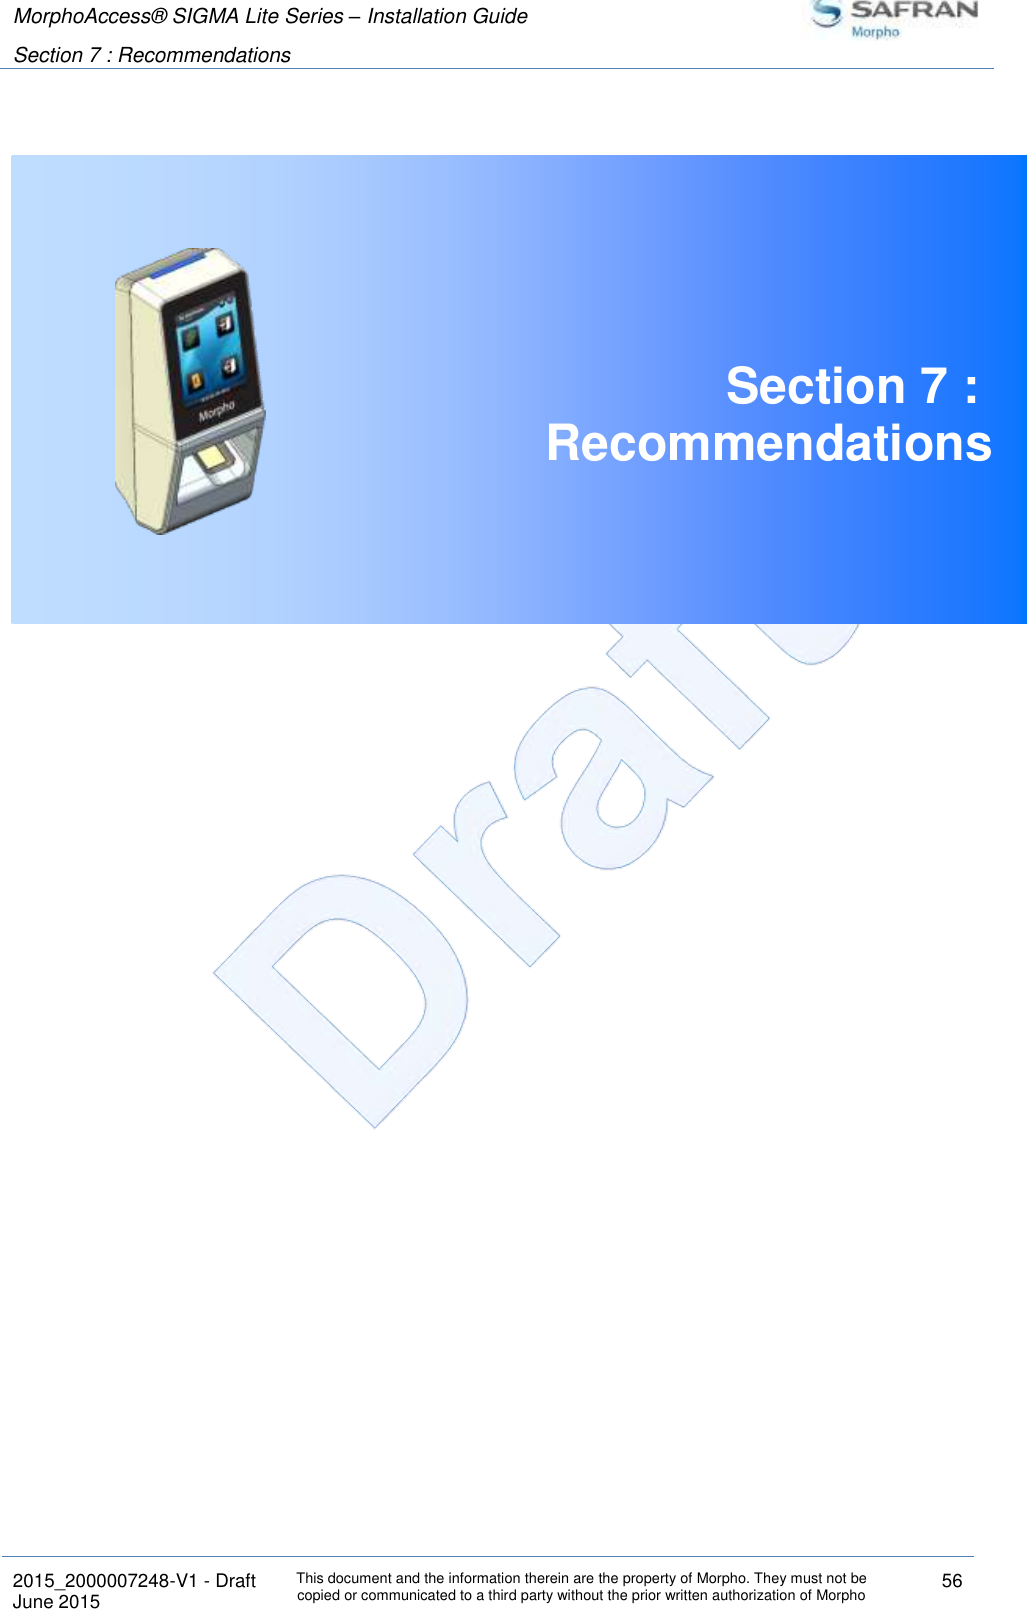 MorphoAccess® SIGMA Lite Series – Installation Guide  Section 7 : Recommendations   2015_2000007248-V1 - Draft This document and the information therein are the property of Morpho. They must not be copied or communicated to a third party without the prior written authorization of Morpho 56 June 2015    Section 7 :  Recommendations     